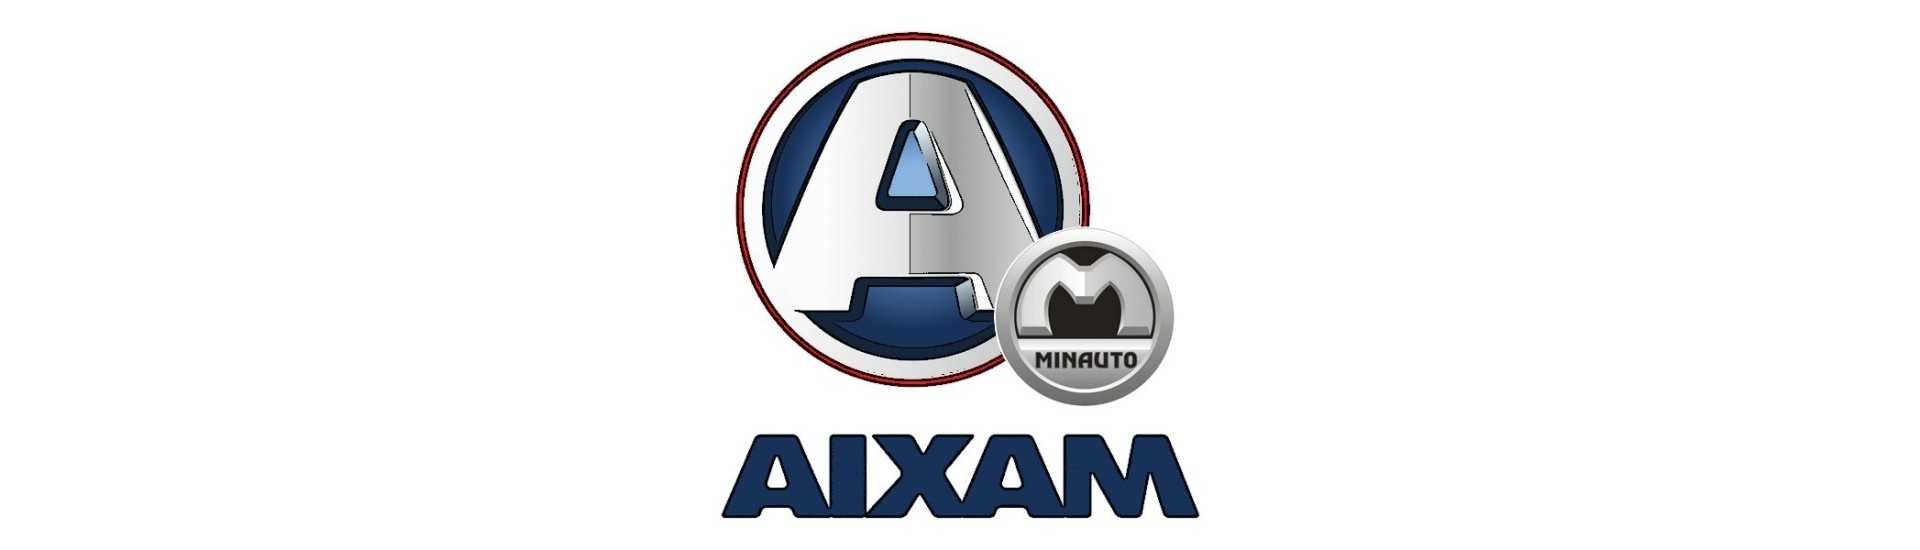 Wheel hub at the best price for car without a permit Aixam Minauto